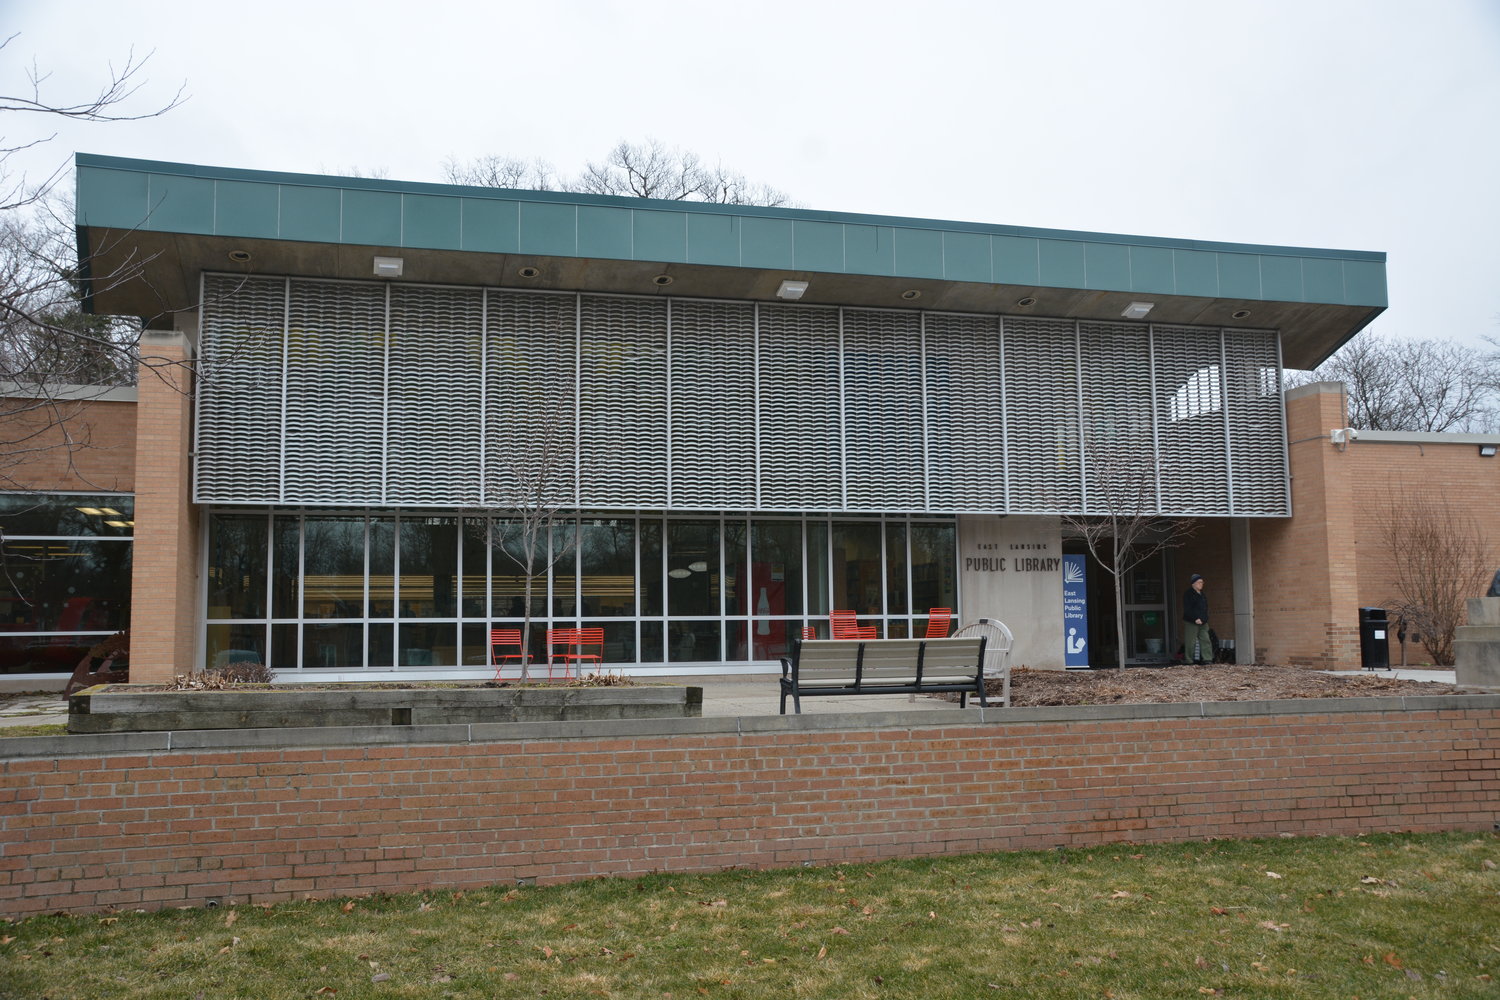 The East Lansing Public Library will celebrate its 100th birthday with a party Saturday (March 11), featuring cake, cookies, music, giveaways and congratulatory speeches from a variety of public officials.